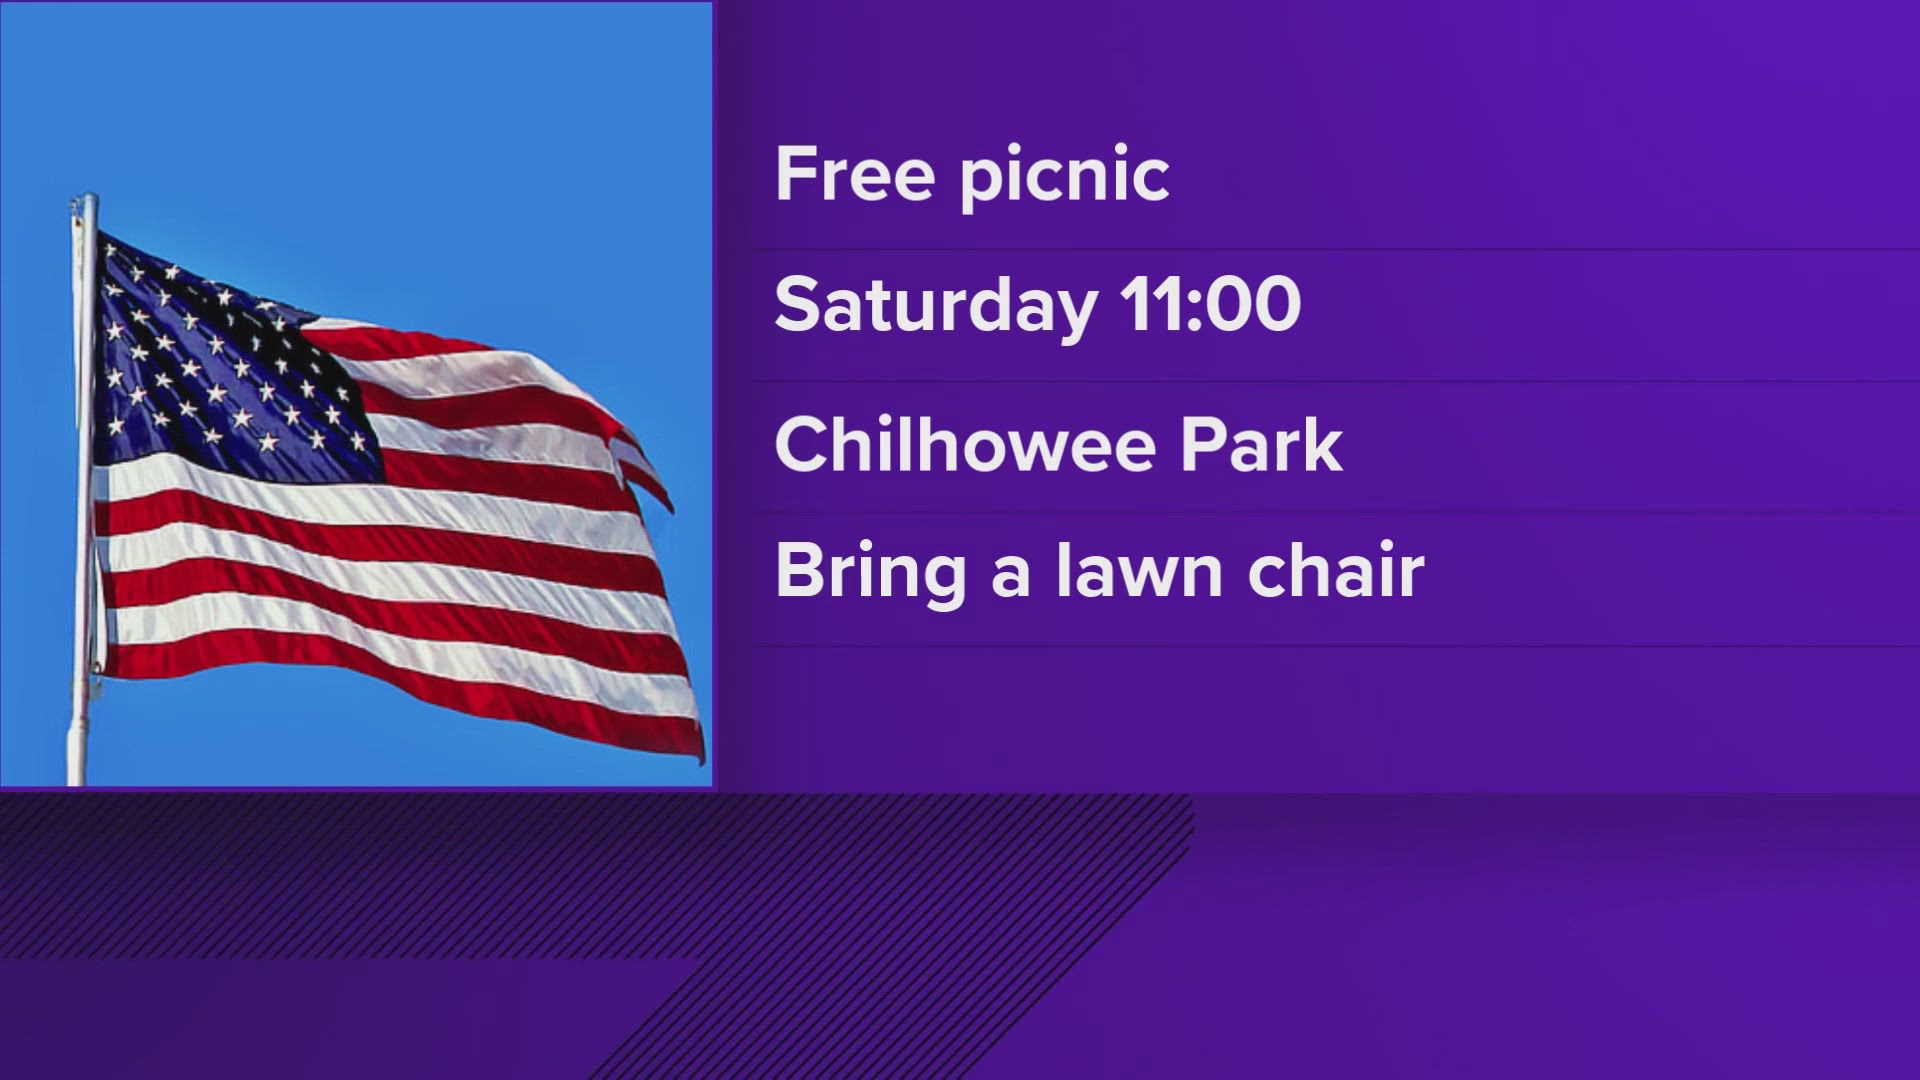 The picnic starts with an opening ceremony at 11 a.m. on Saturday, May 18.